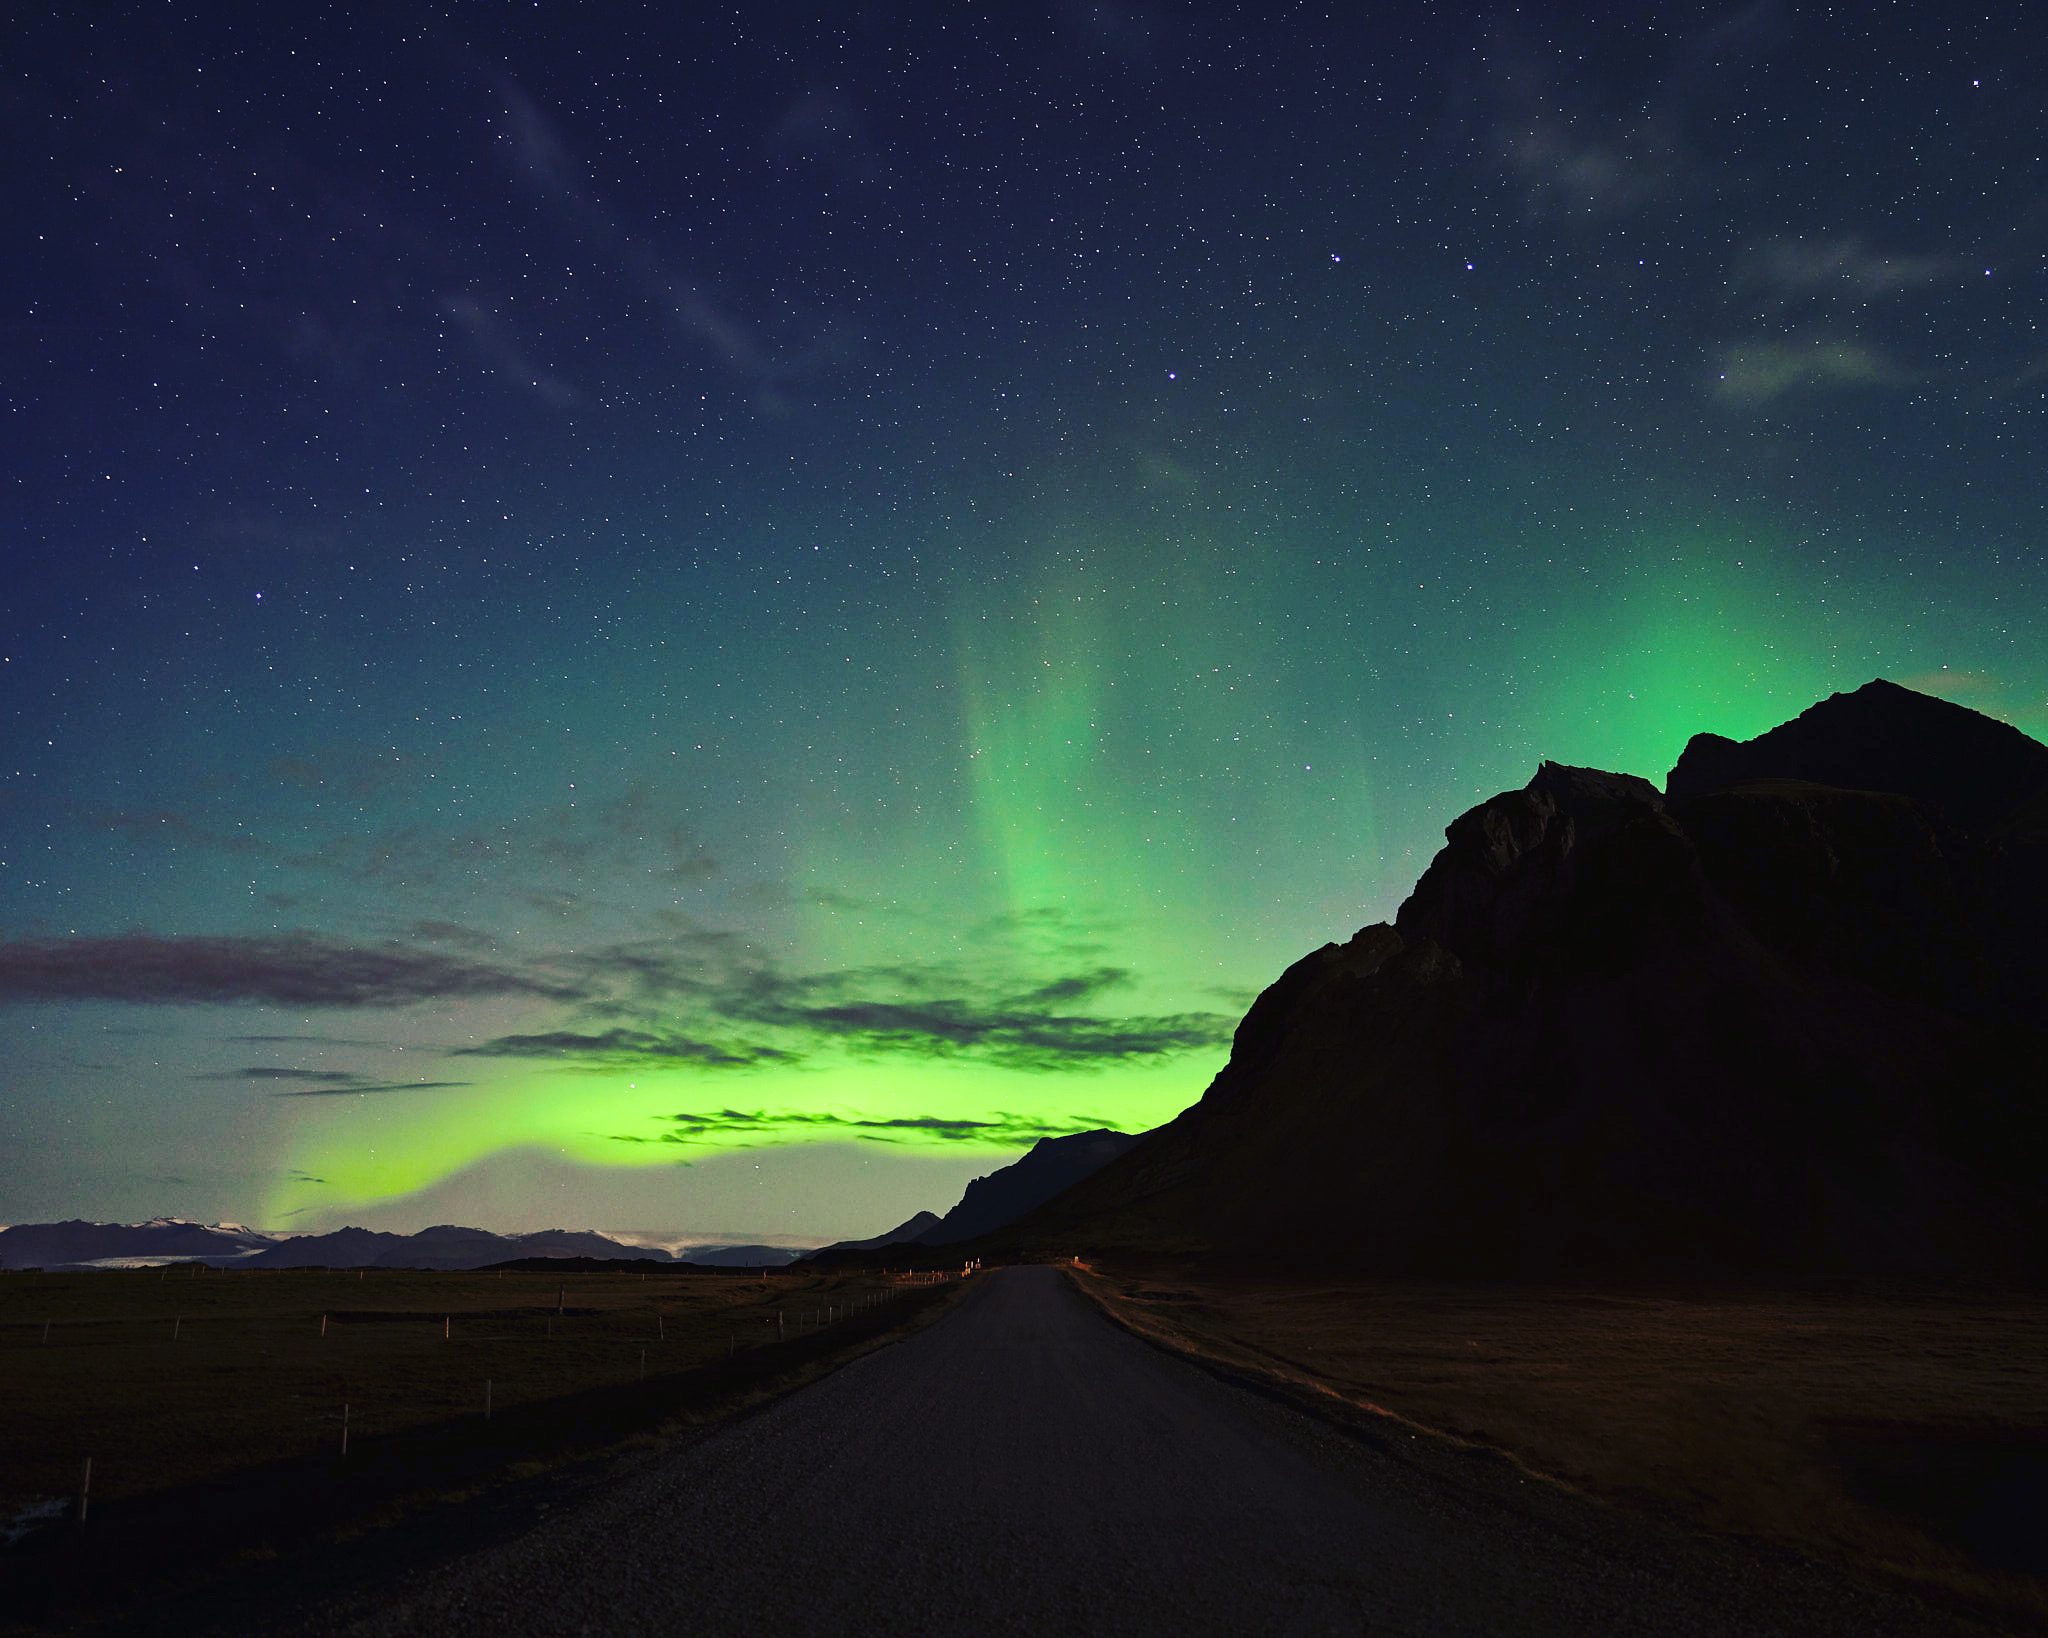 a road with green lights in the sky